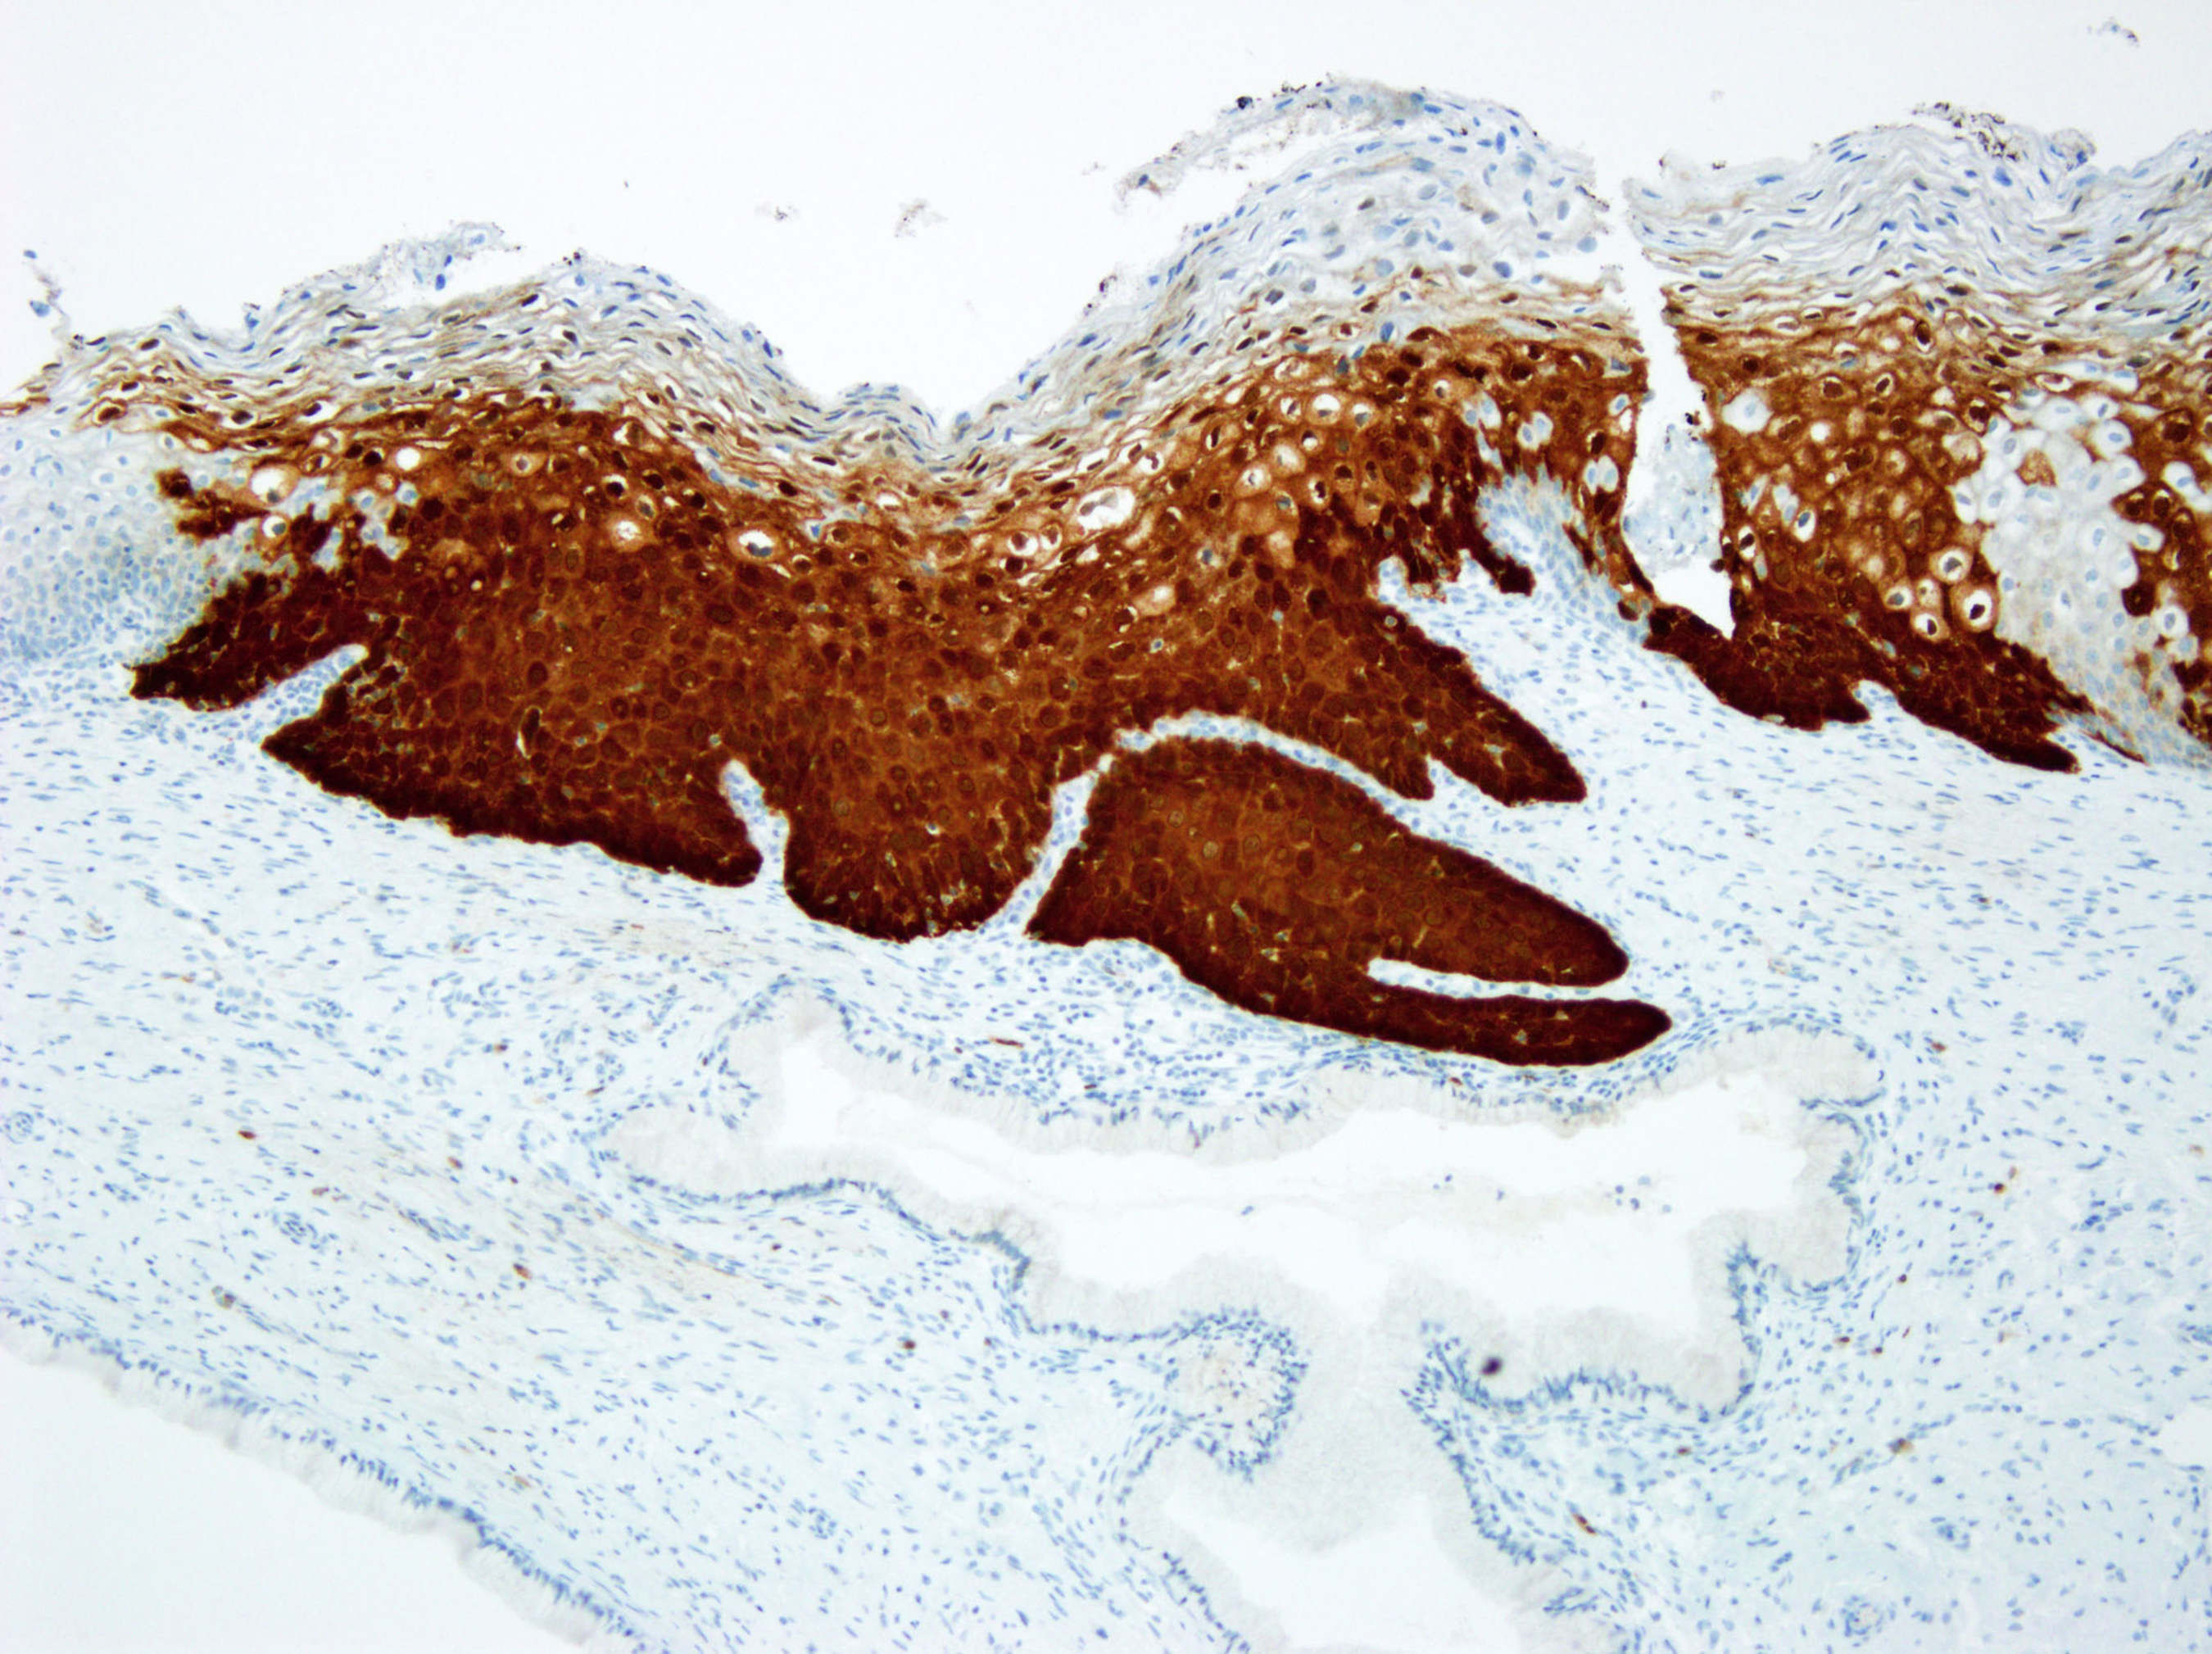 Cervical biopsy stained with the CINtec(R) p16 Histology test. The over-expression of the p16 biomarker in cervical specimens, detected by the CINtec(R) p16 Histology immunohistochemistry test, assists doctors in determining the presence or absence of high-grade cervical disease. (PRNewsFoto/Ventana Medical Systems, Inc.)